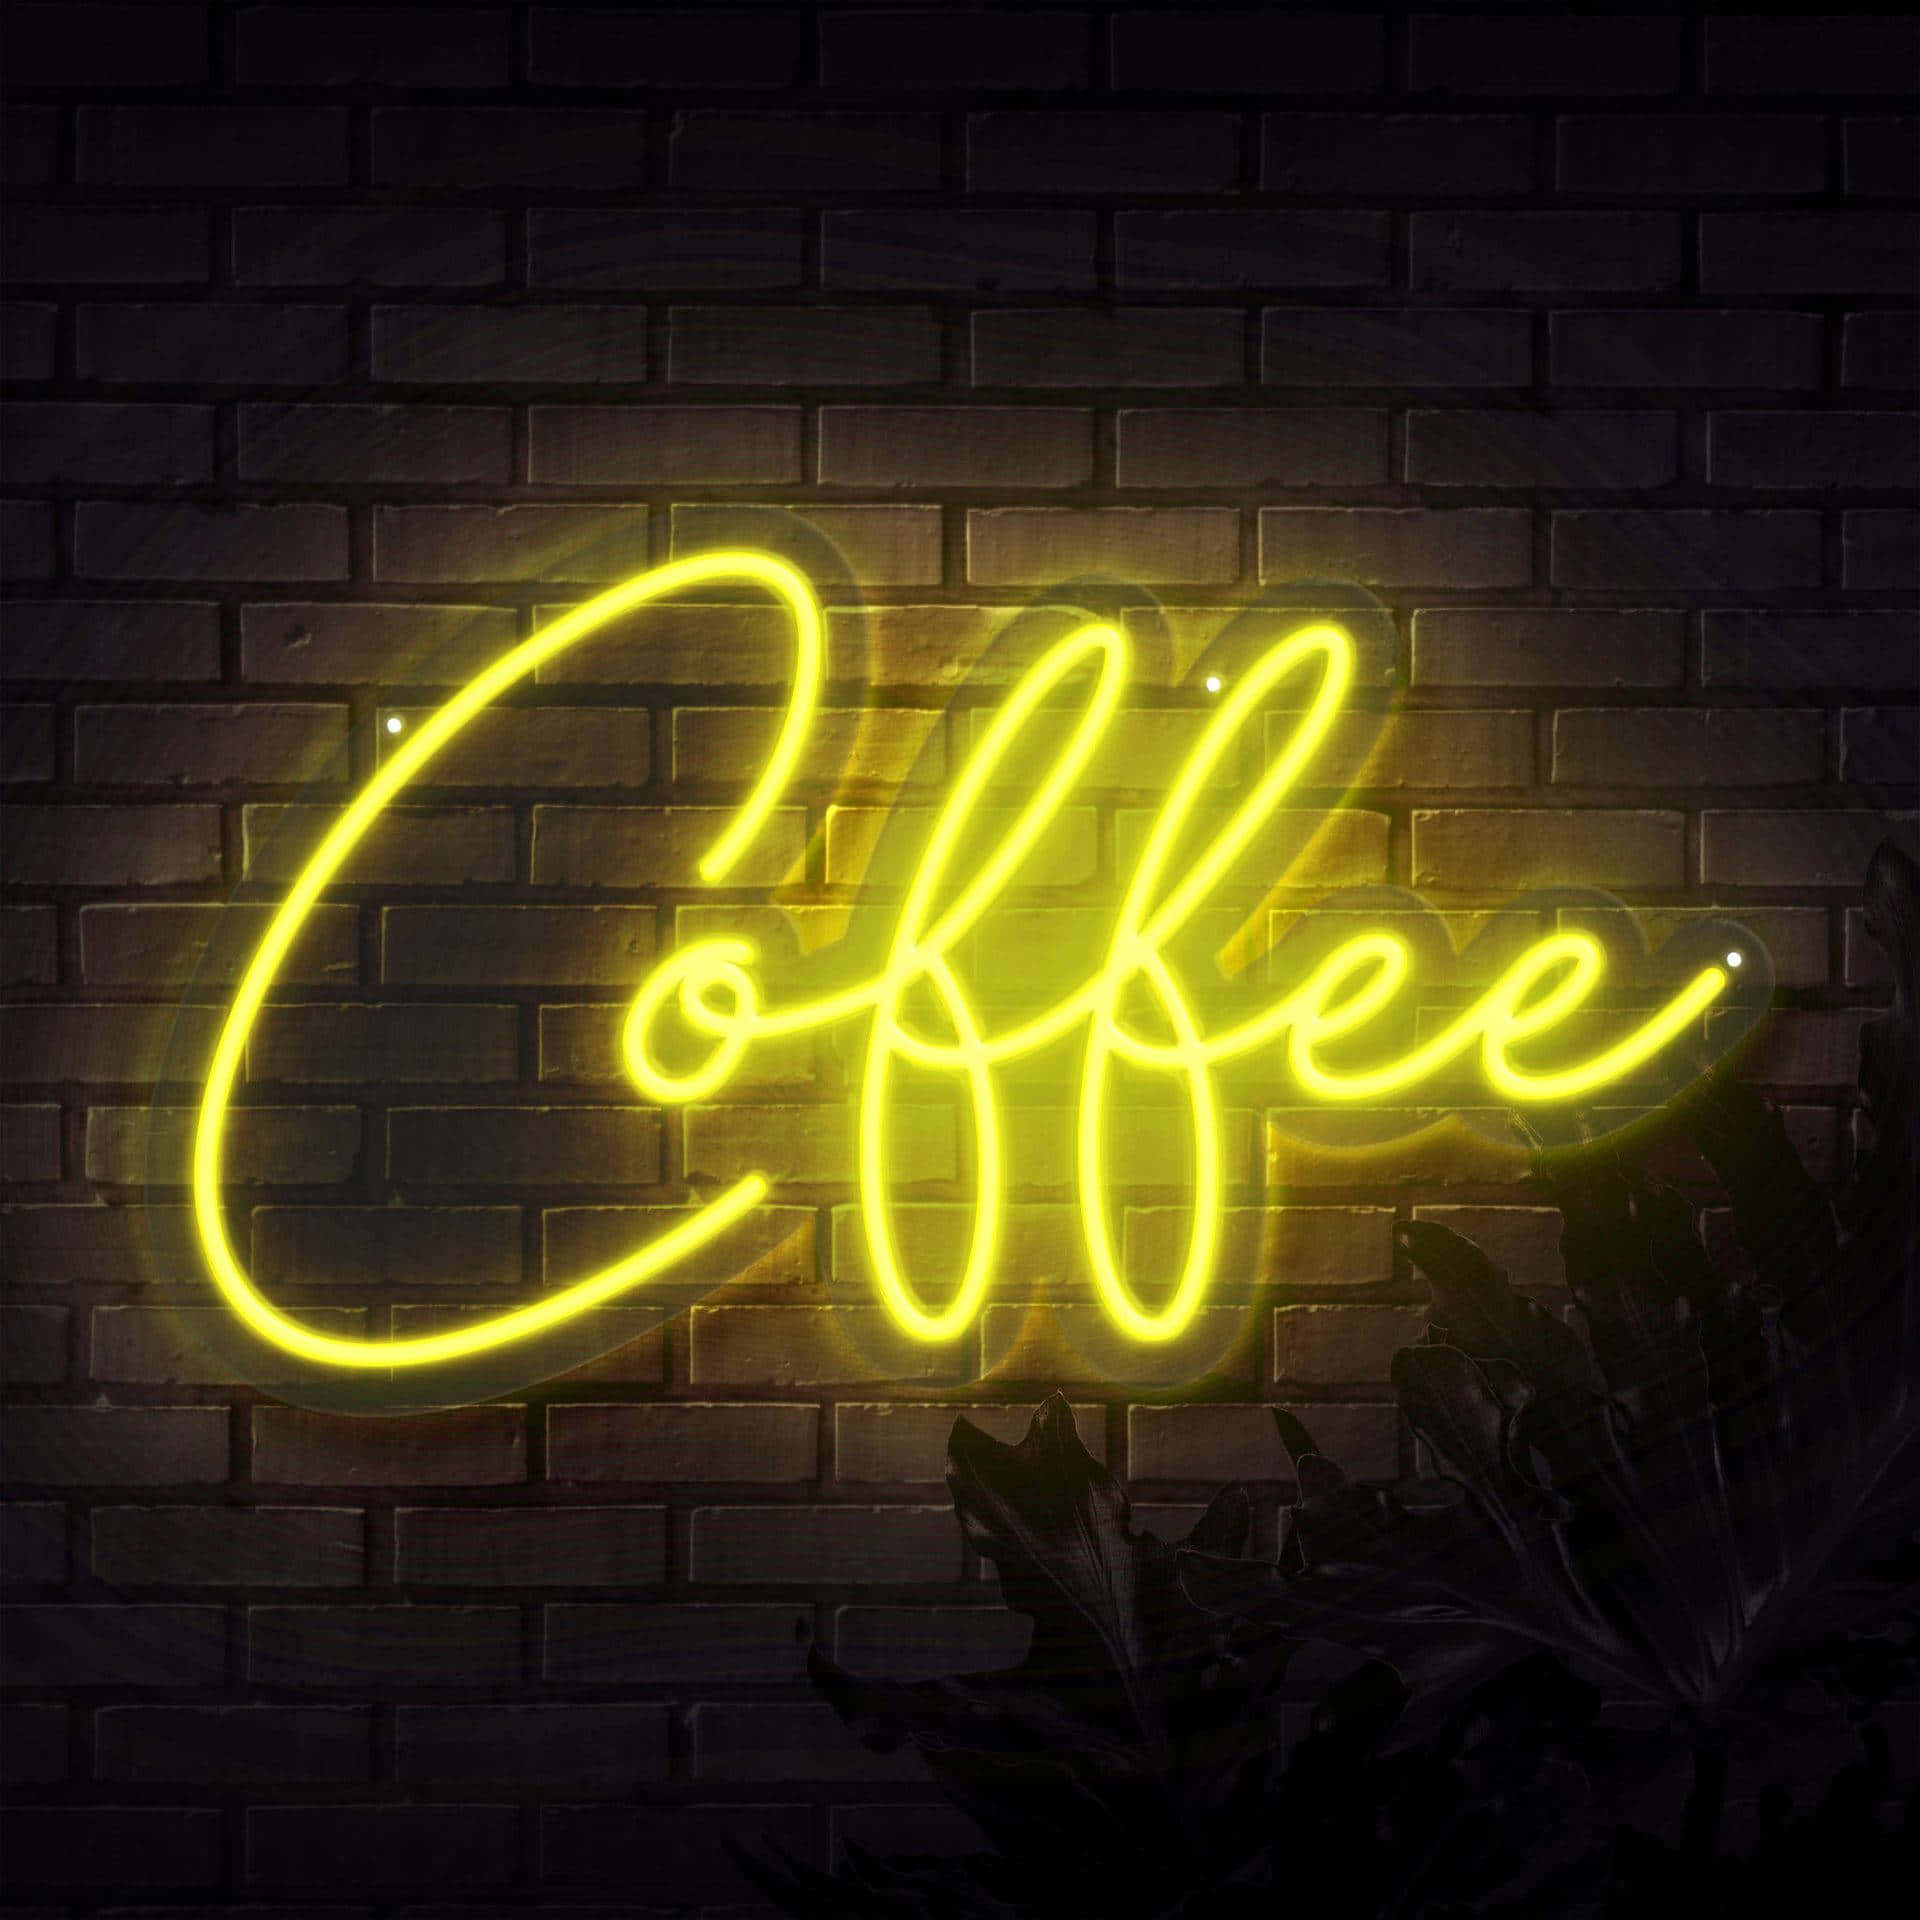 Brighten up your decor with this eye-catching yellow neon light Wallpaper